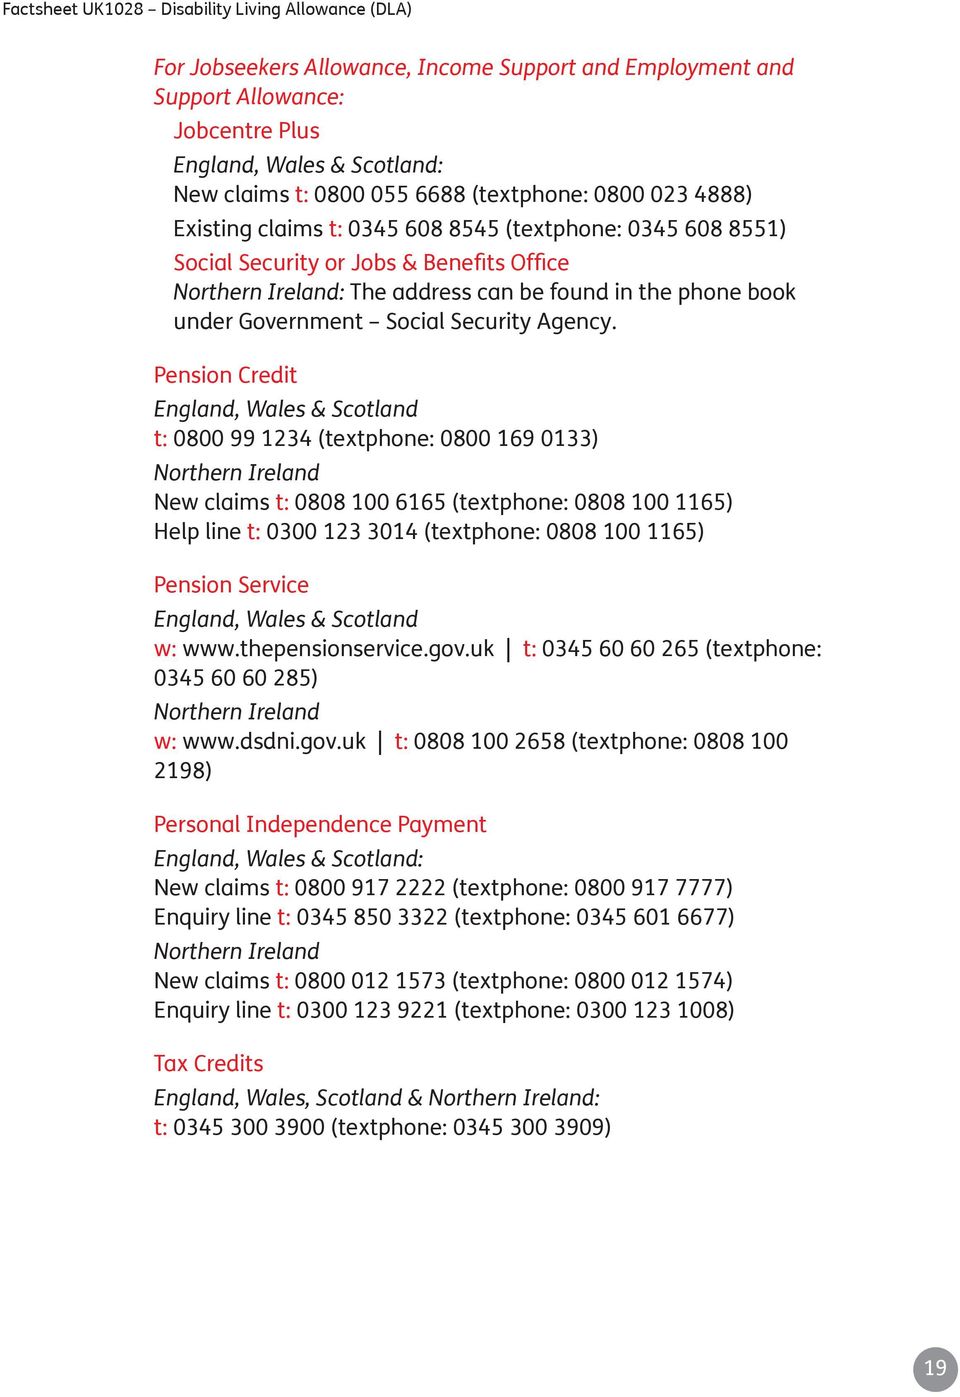 Pension Credit England, Wales & Scotland t: 0800 99 1234 (textphone: 0800 169 0133) Northern Ireland New claims t: 0808 100 6165 (textphone: 0808 100 1165) Help line t: 0300 123 3014 (textphone: 0808